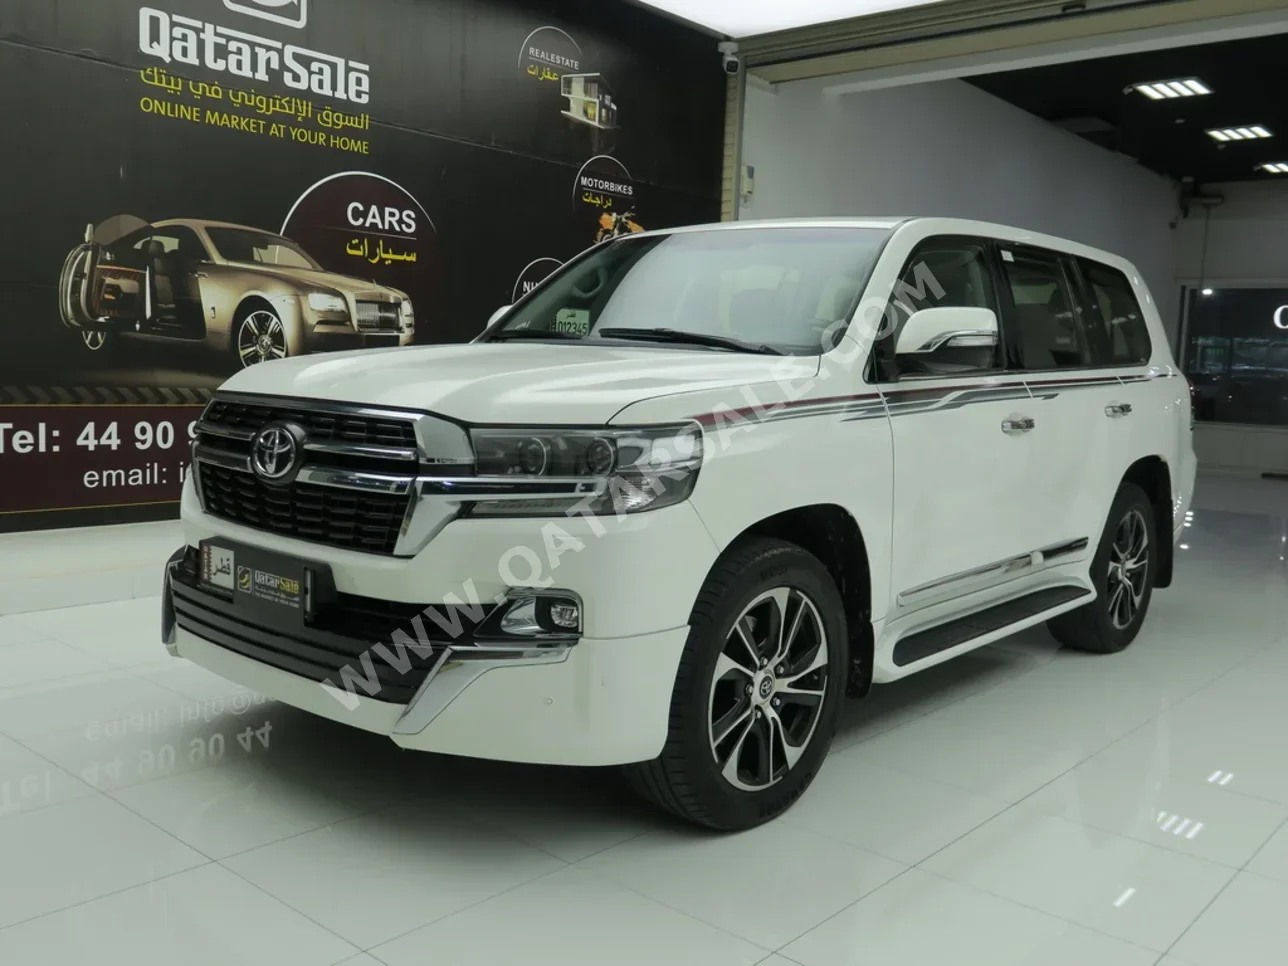 Toyota  Land Cruiser  GXR- Grand Touring  2021  Automatic  72,000 Km  8 Cylinder  Four Wheel Drive (4WD)  SUV  White  With Warranty